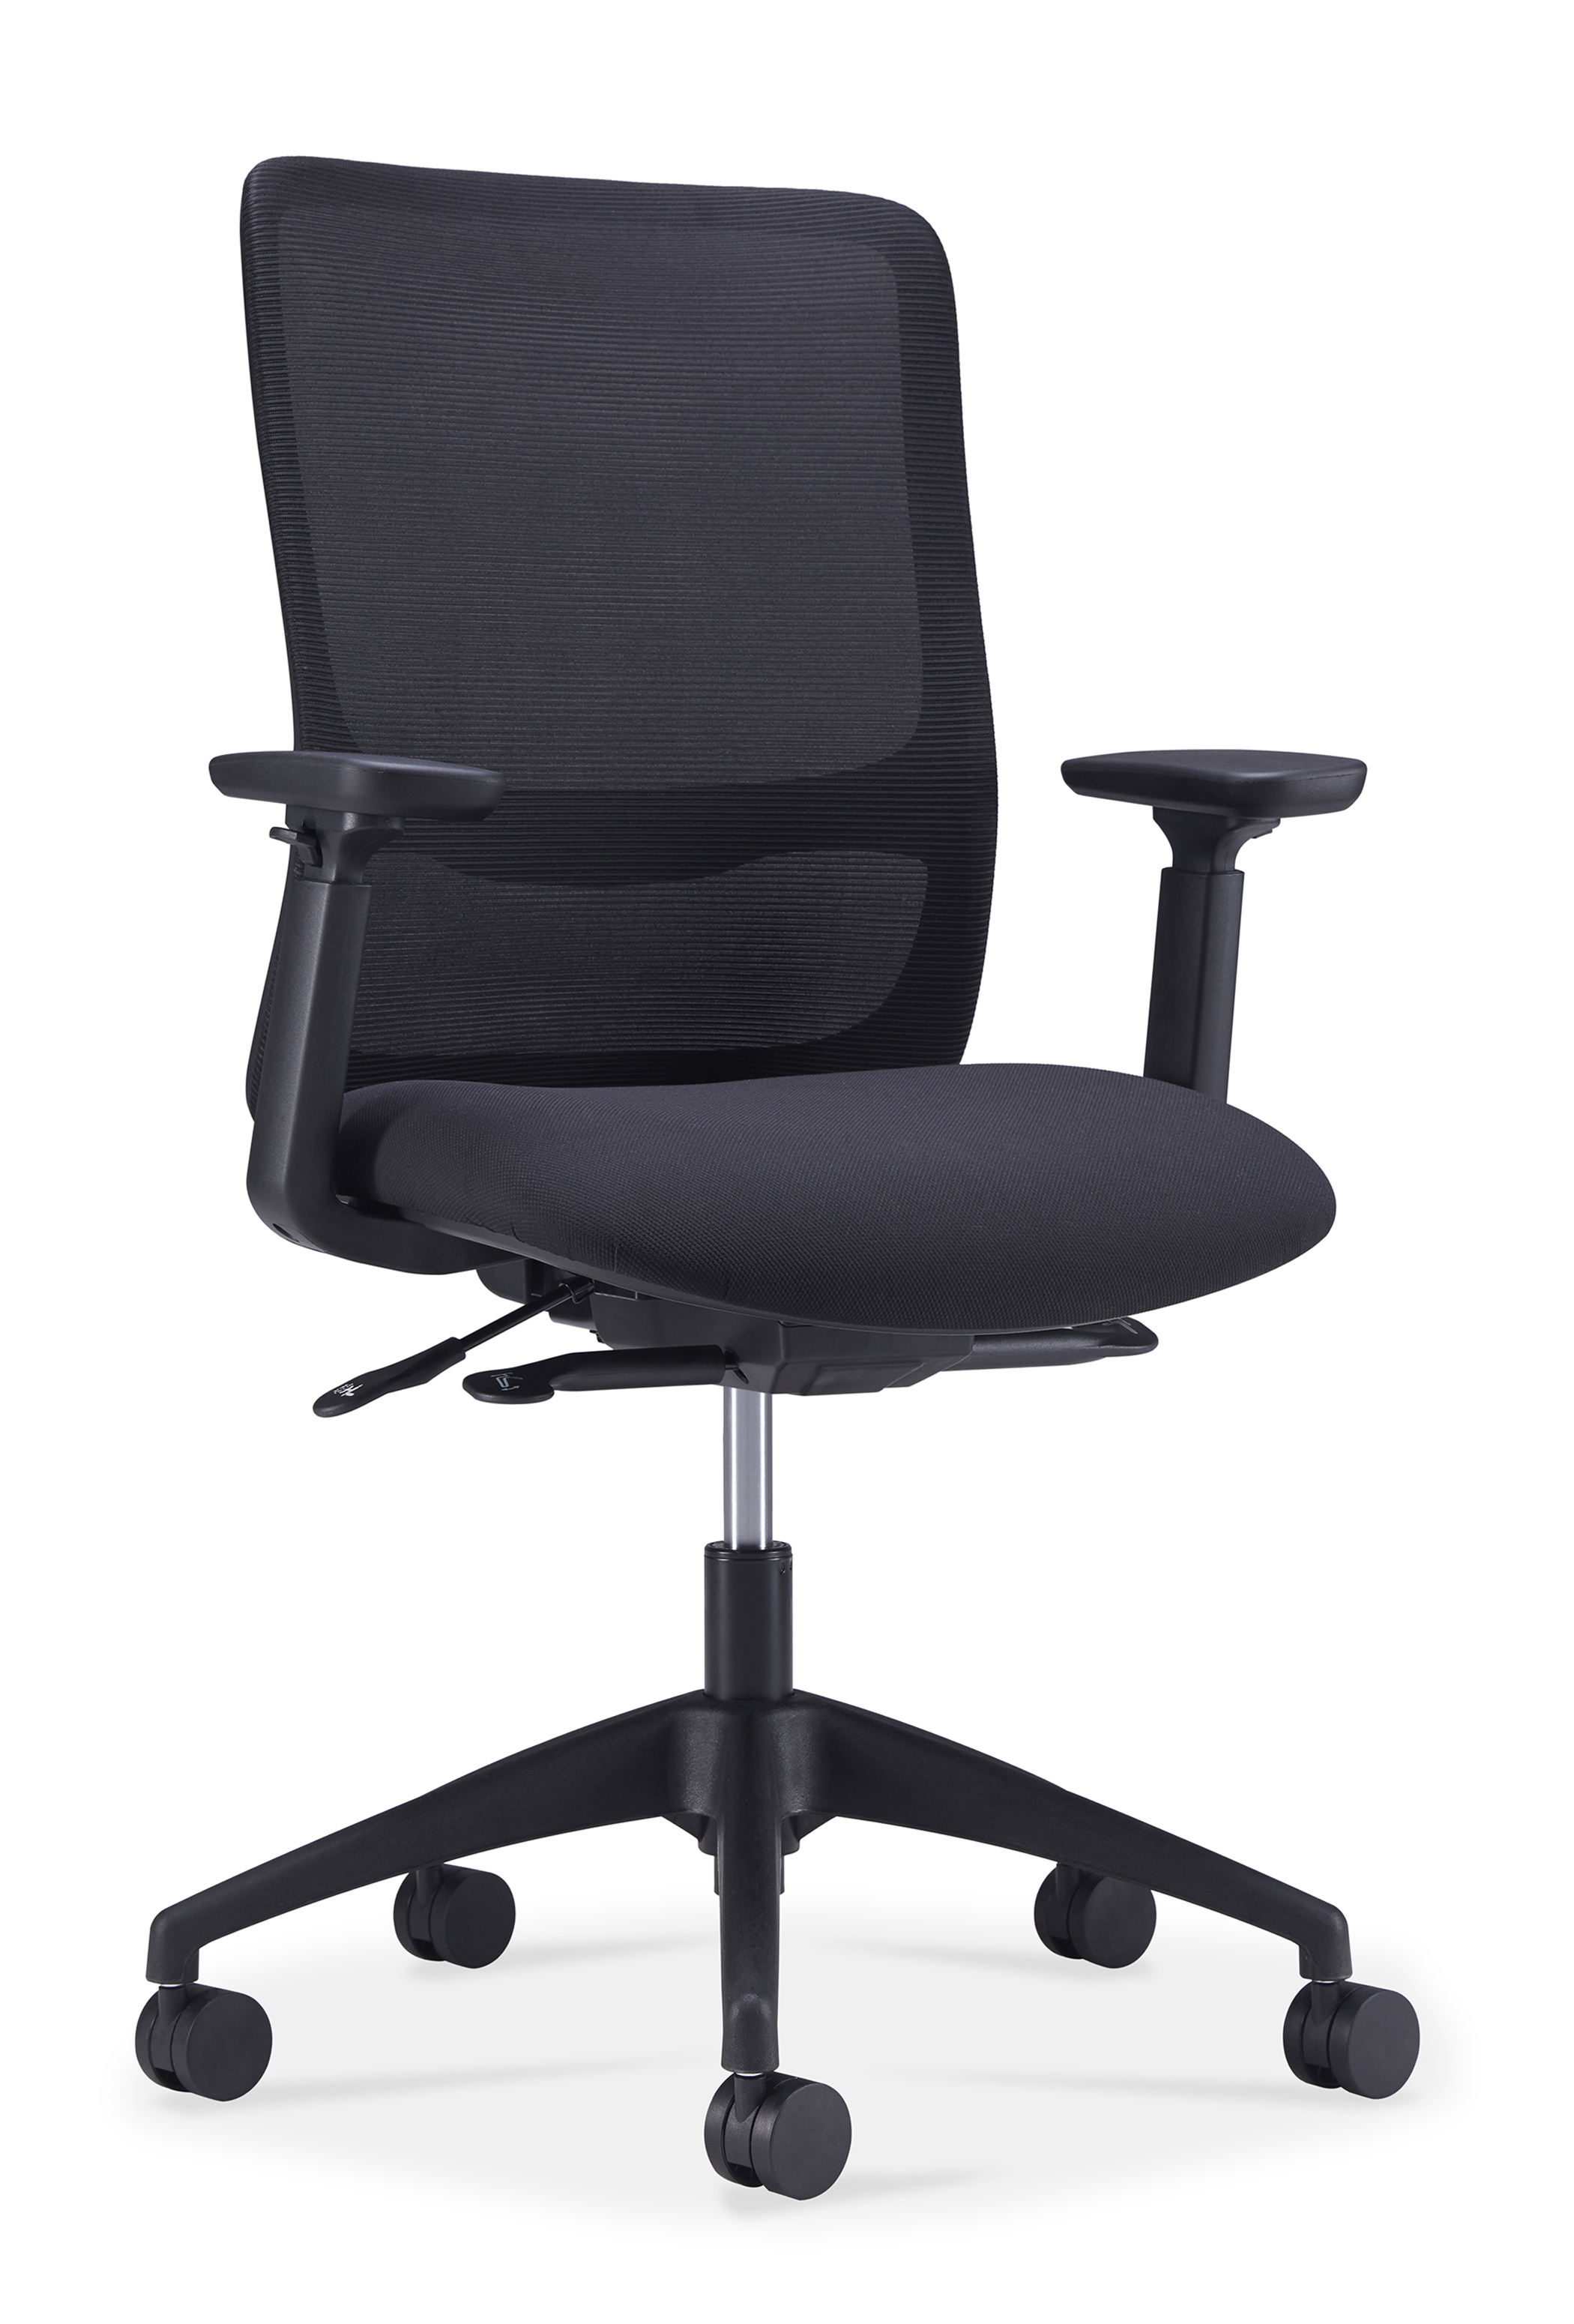 WS - L21 task chair (Front angle)